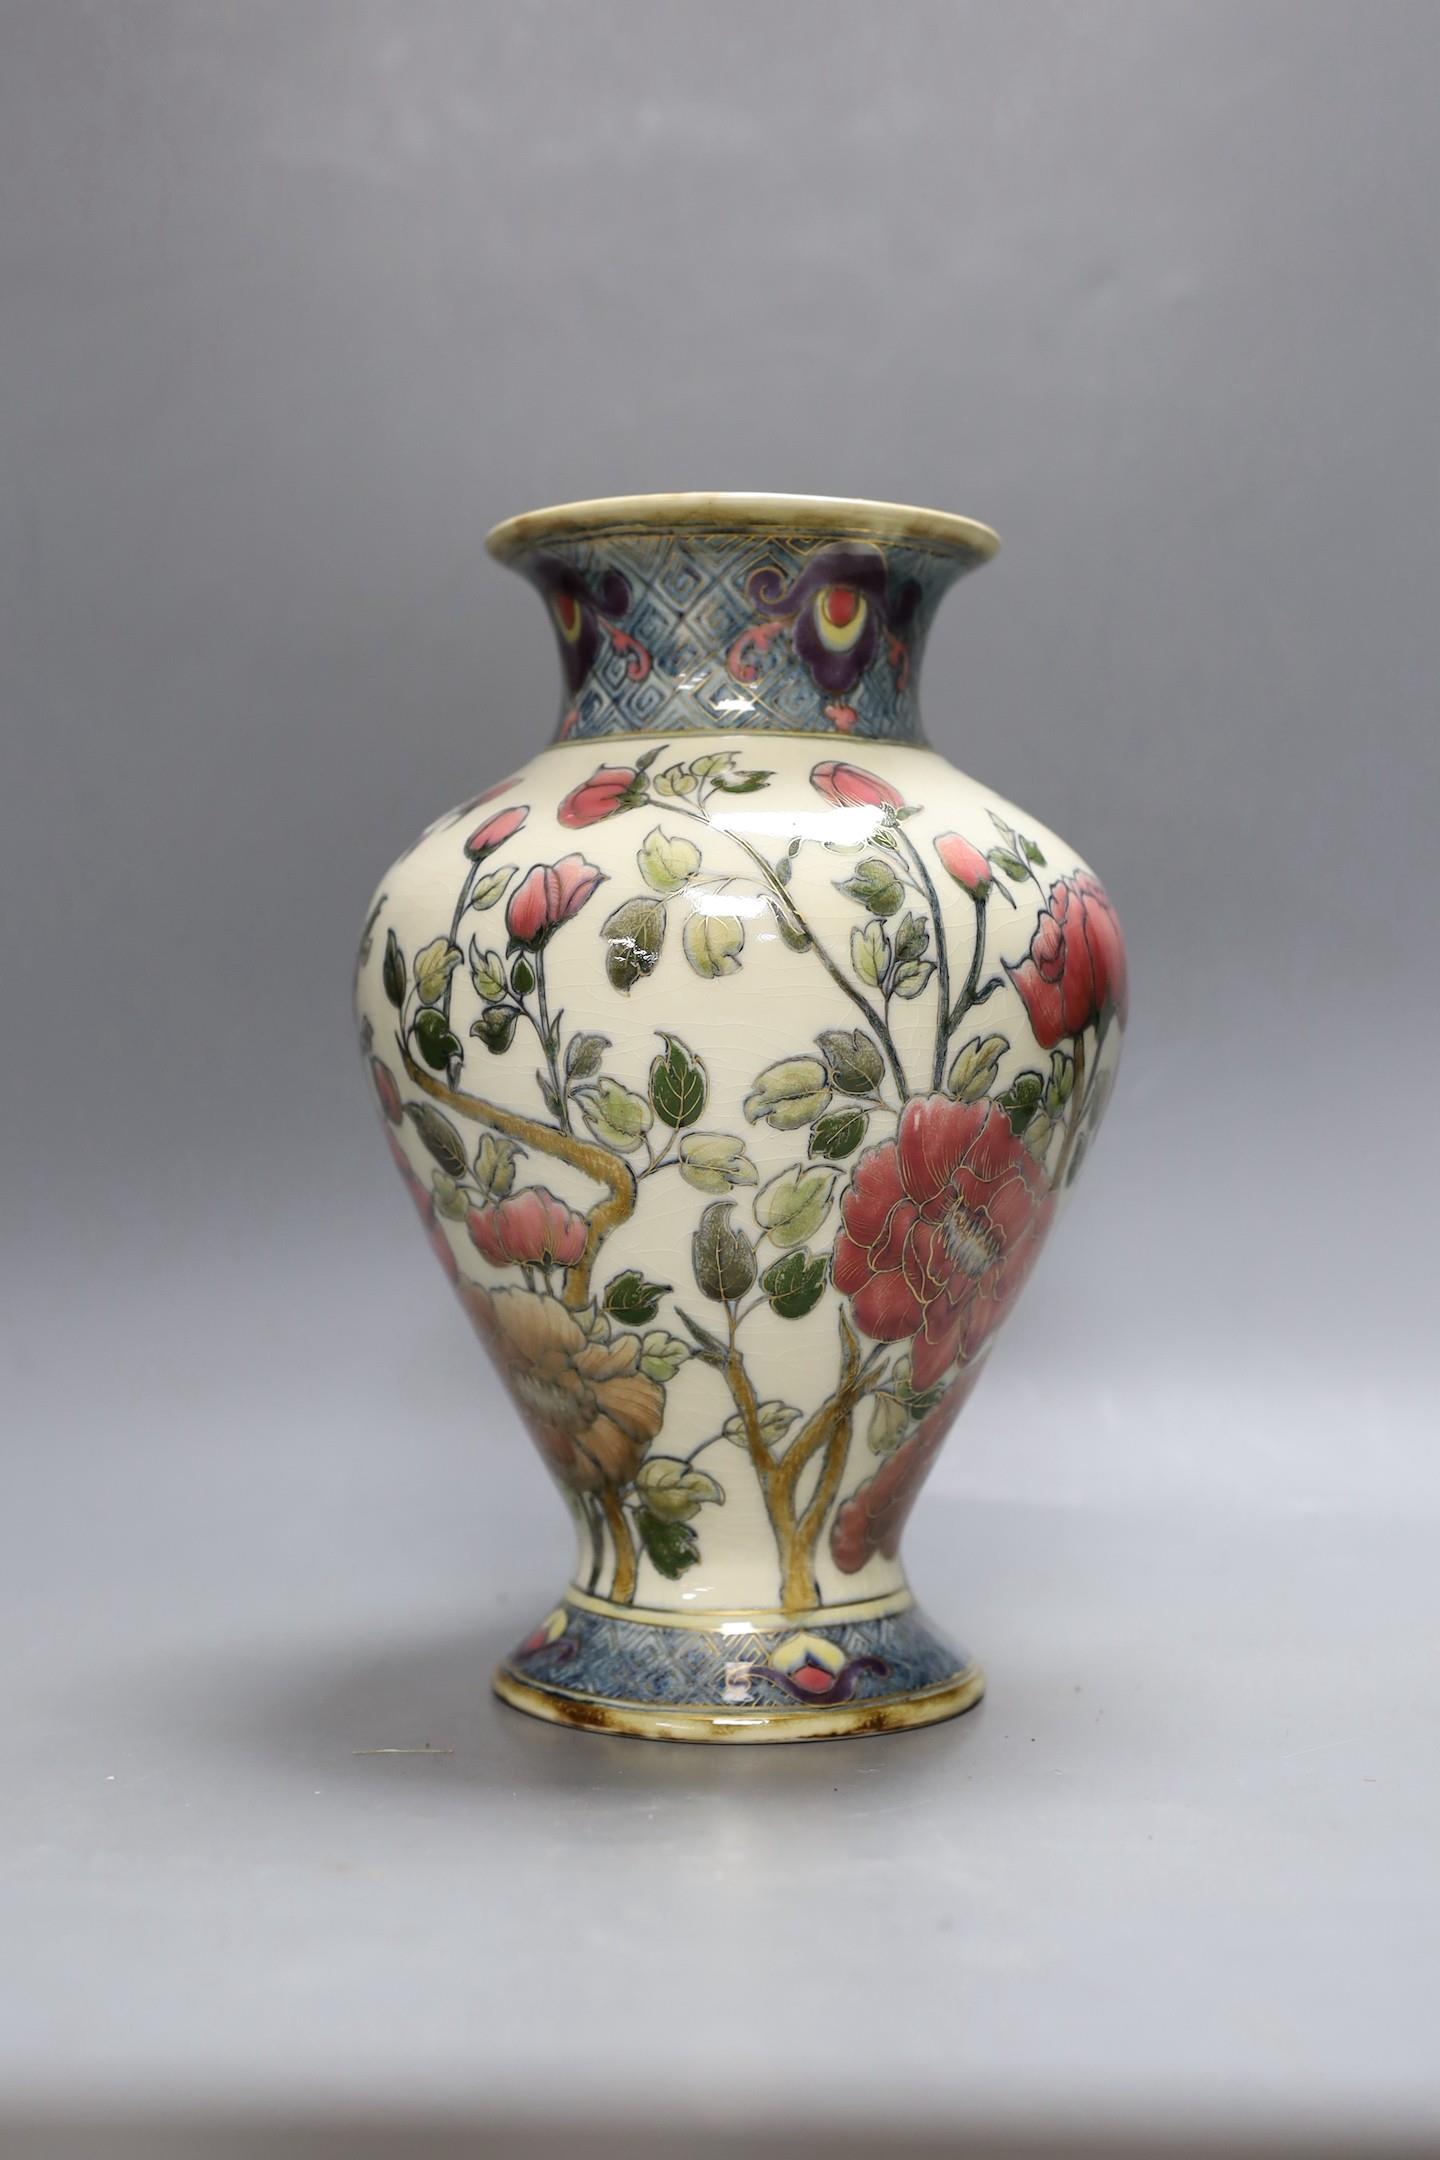 An early 20th century Zsolnay Persian style pottery vase. 26cm tall - Image 2 of 4